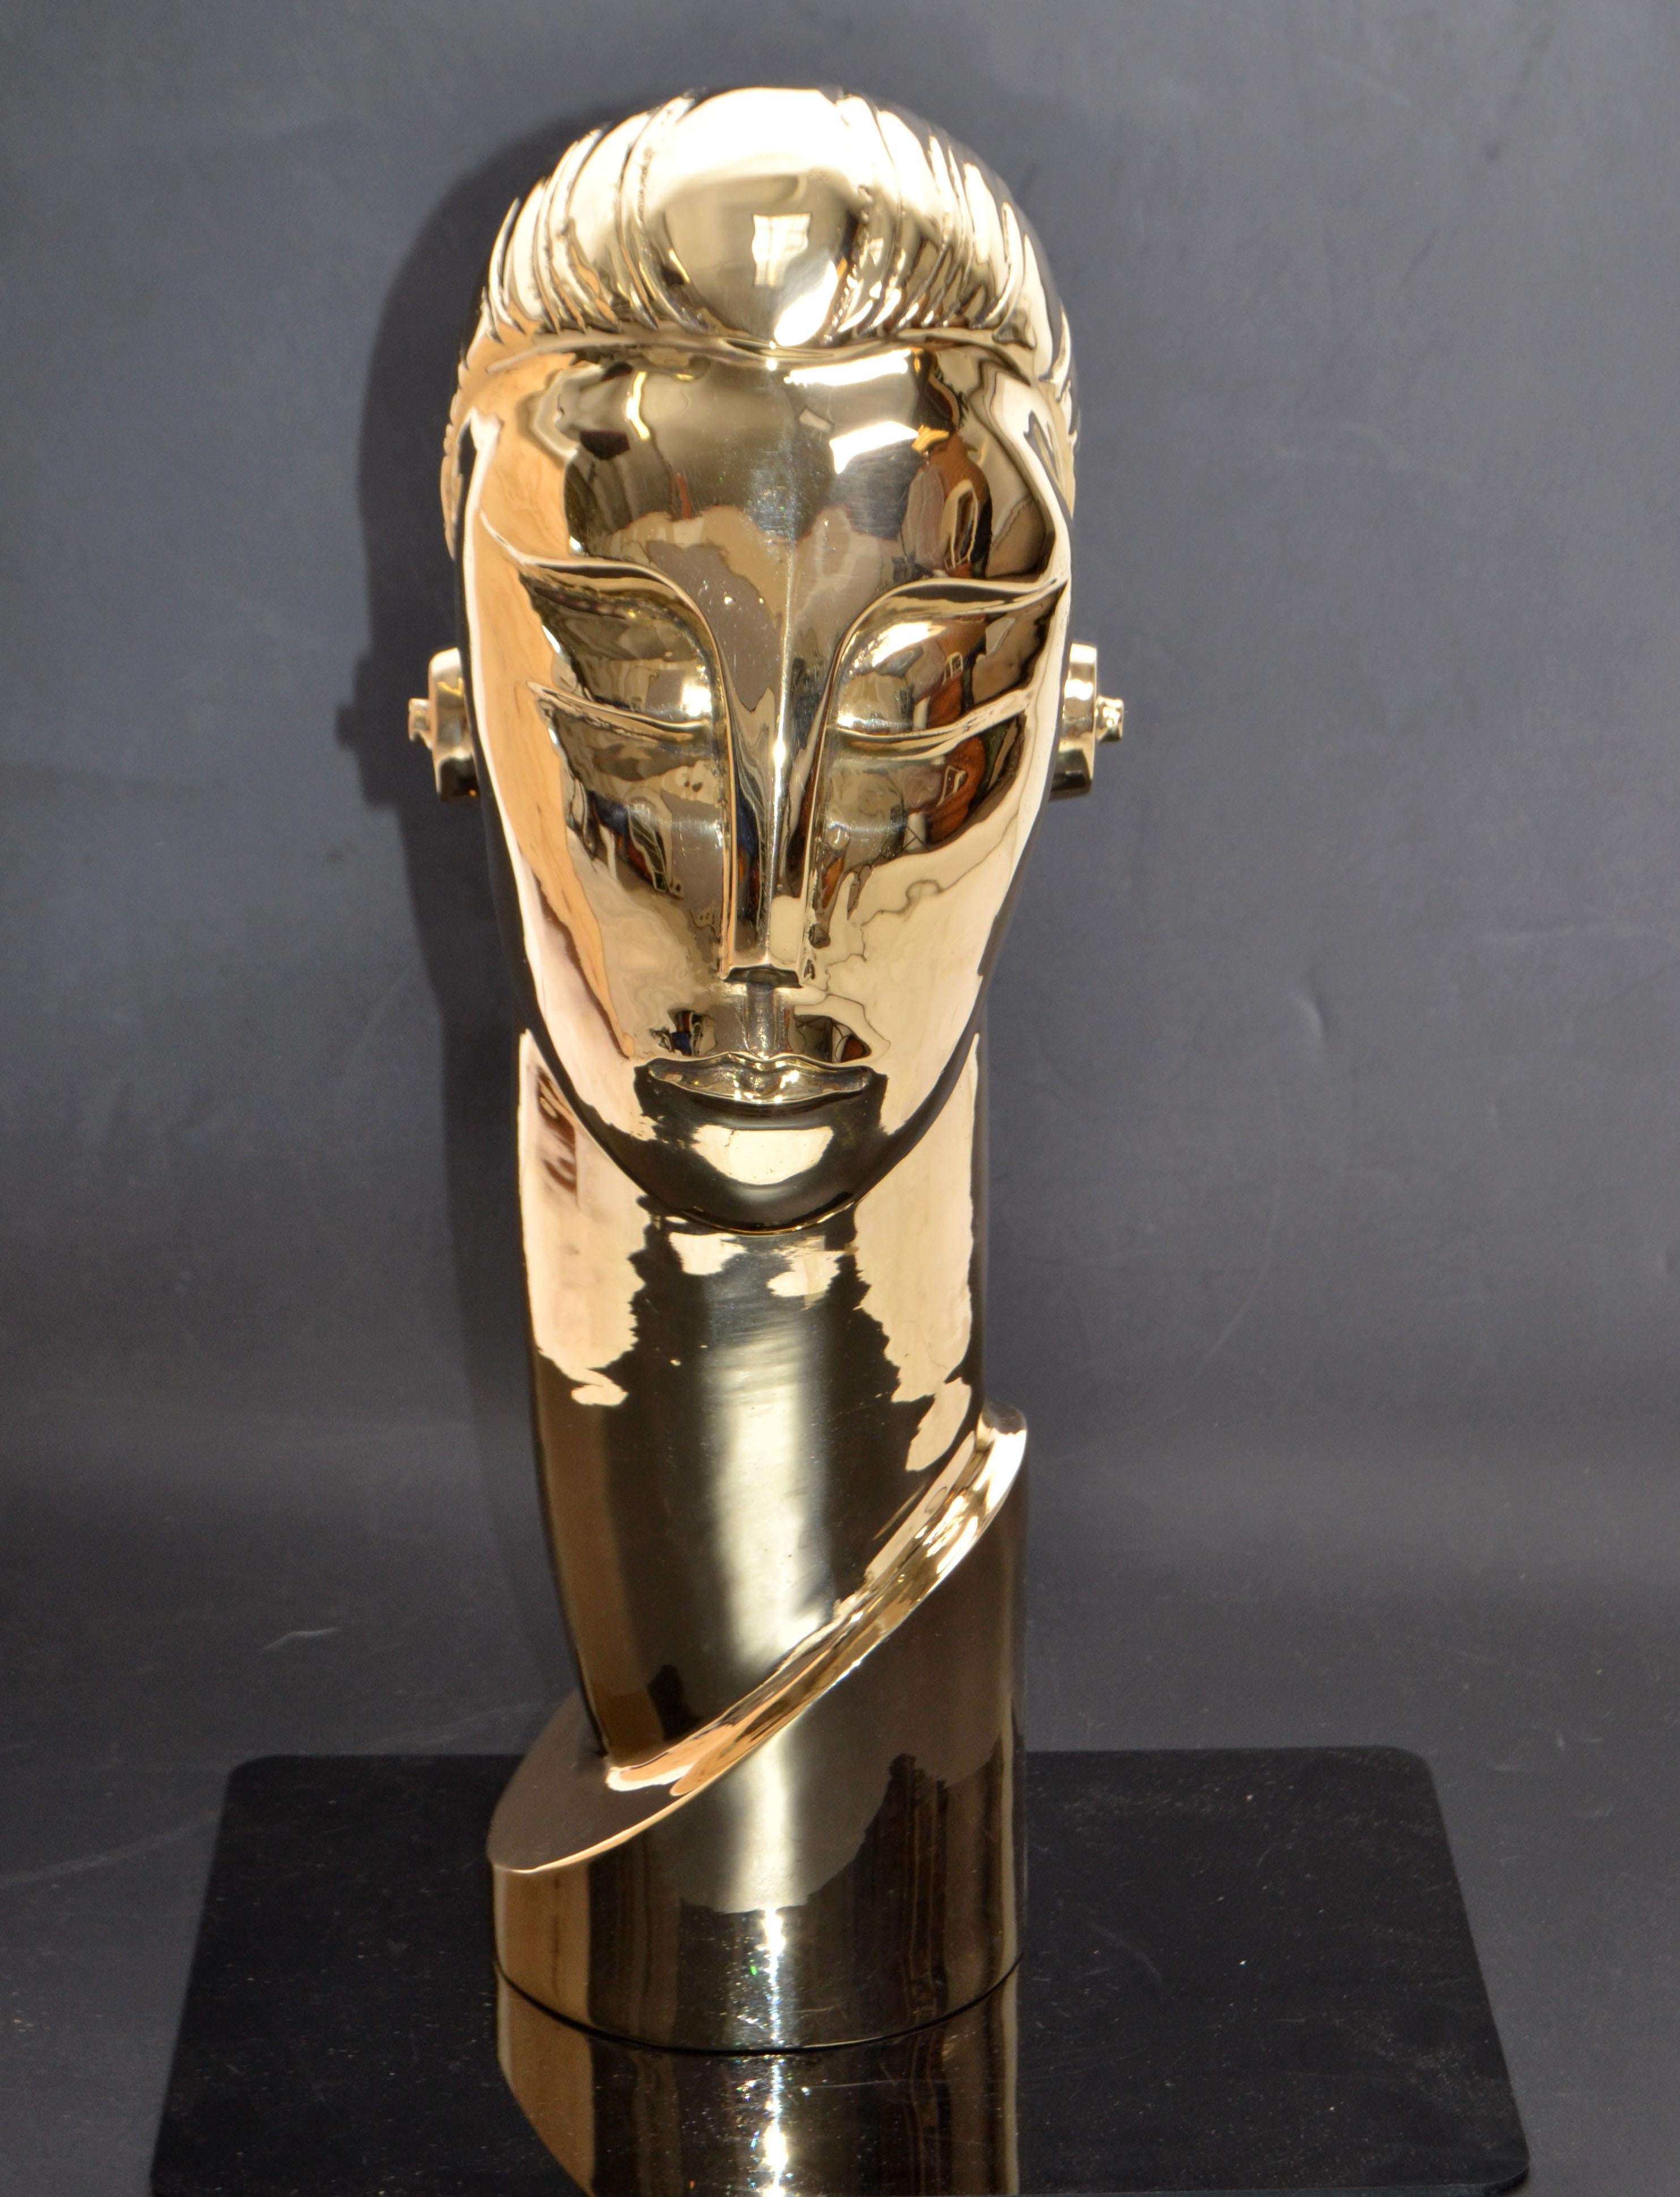 Art Deco style manner of Franz Hagenauer bronze bust with elongated neck.
Figurative sculpture depicting the head of a figure with elongated neck and pegged ear adornments.
No signature found. Made circa 1965-1969.
 